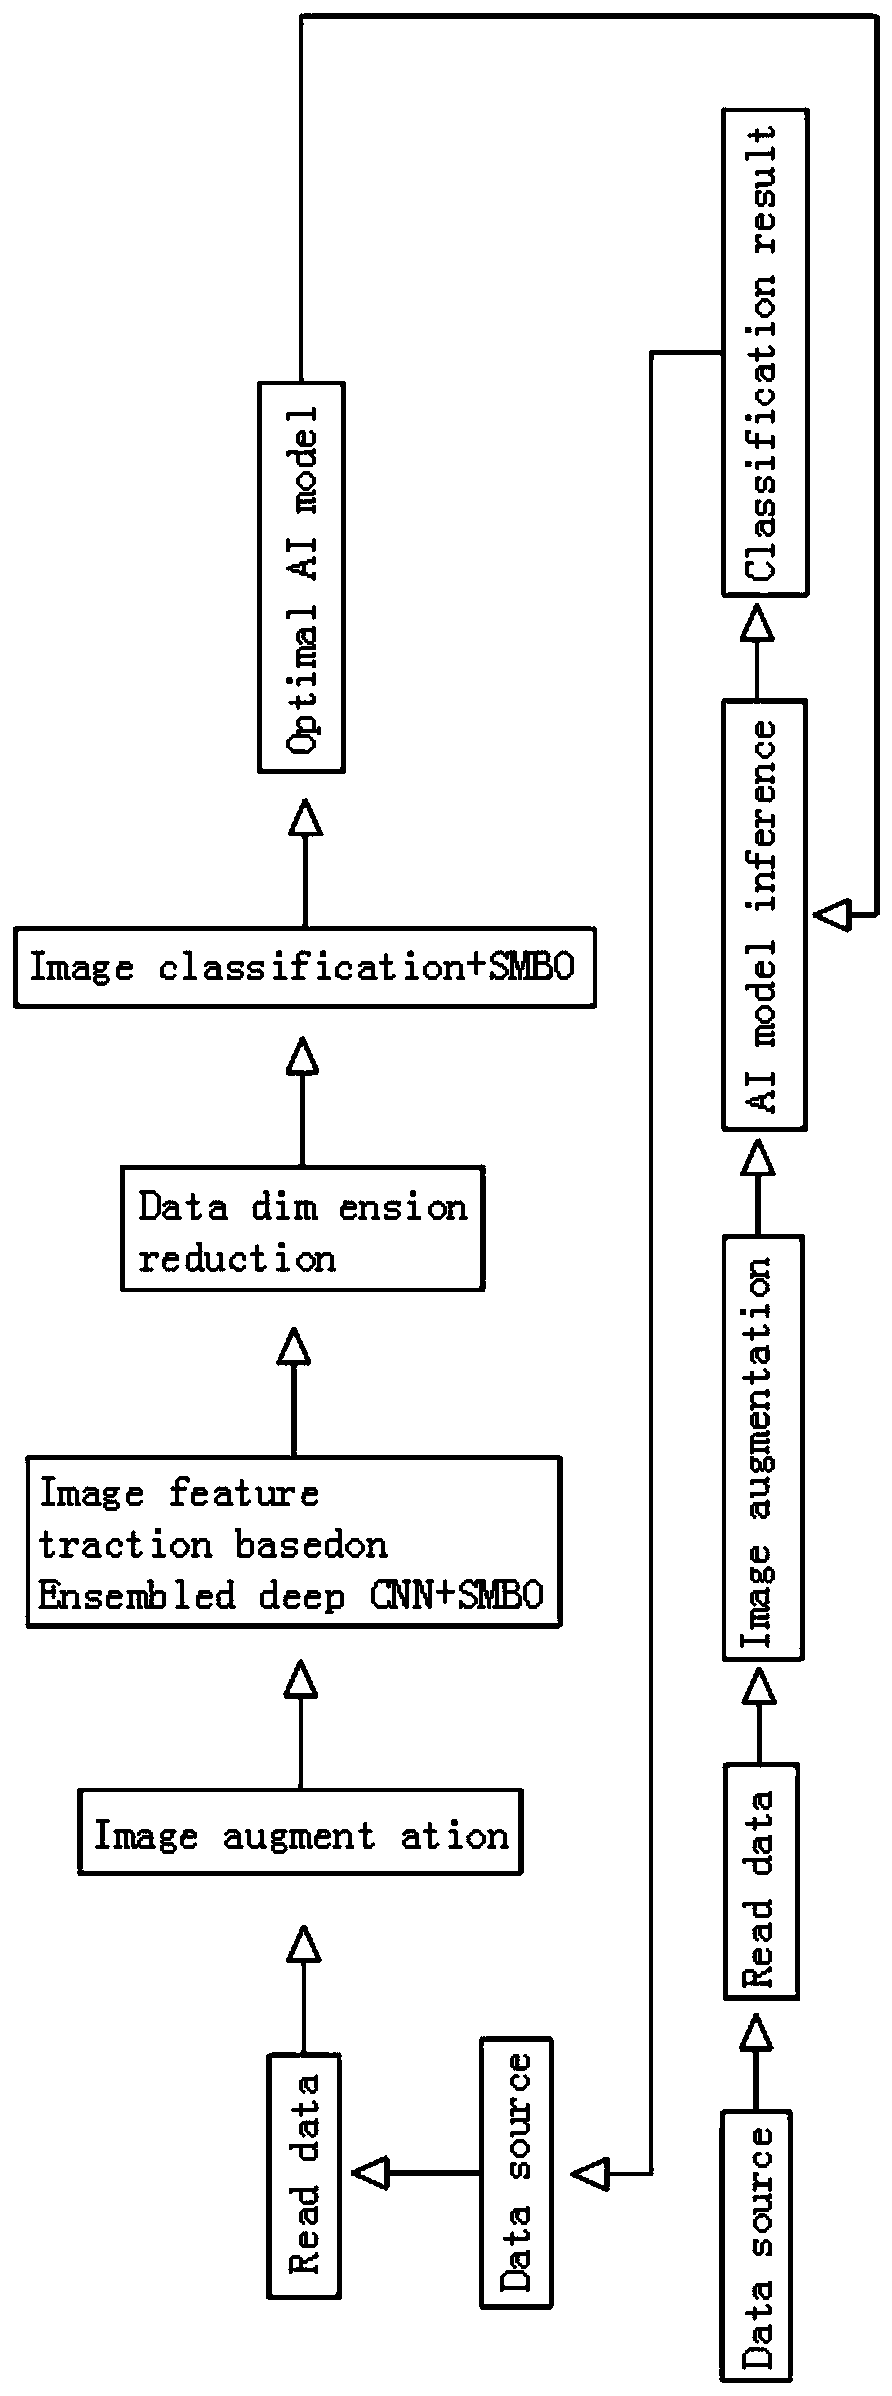 Integrated circuit defect image recognition and classification system based on fusion deep learning model